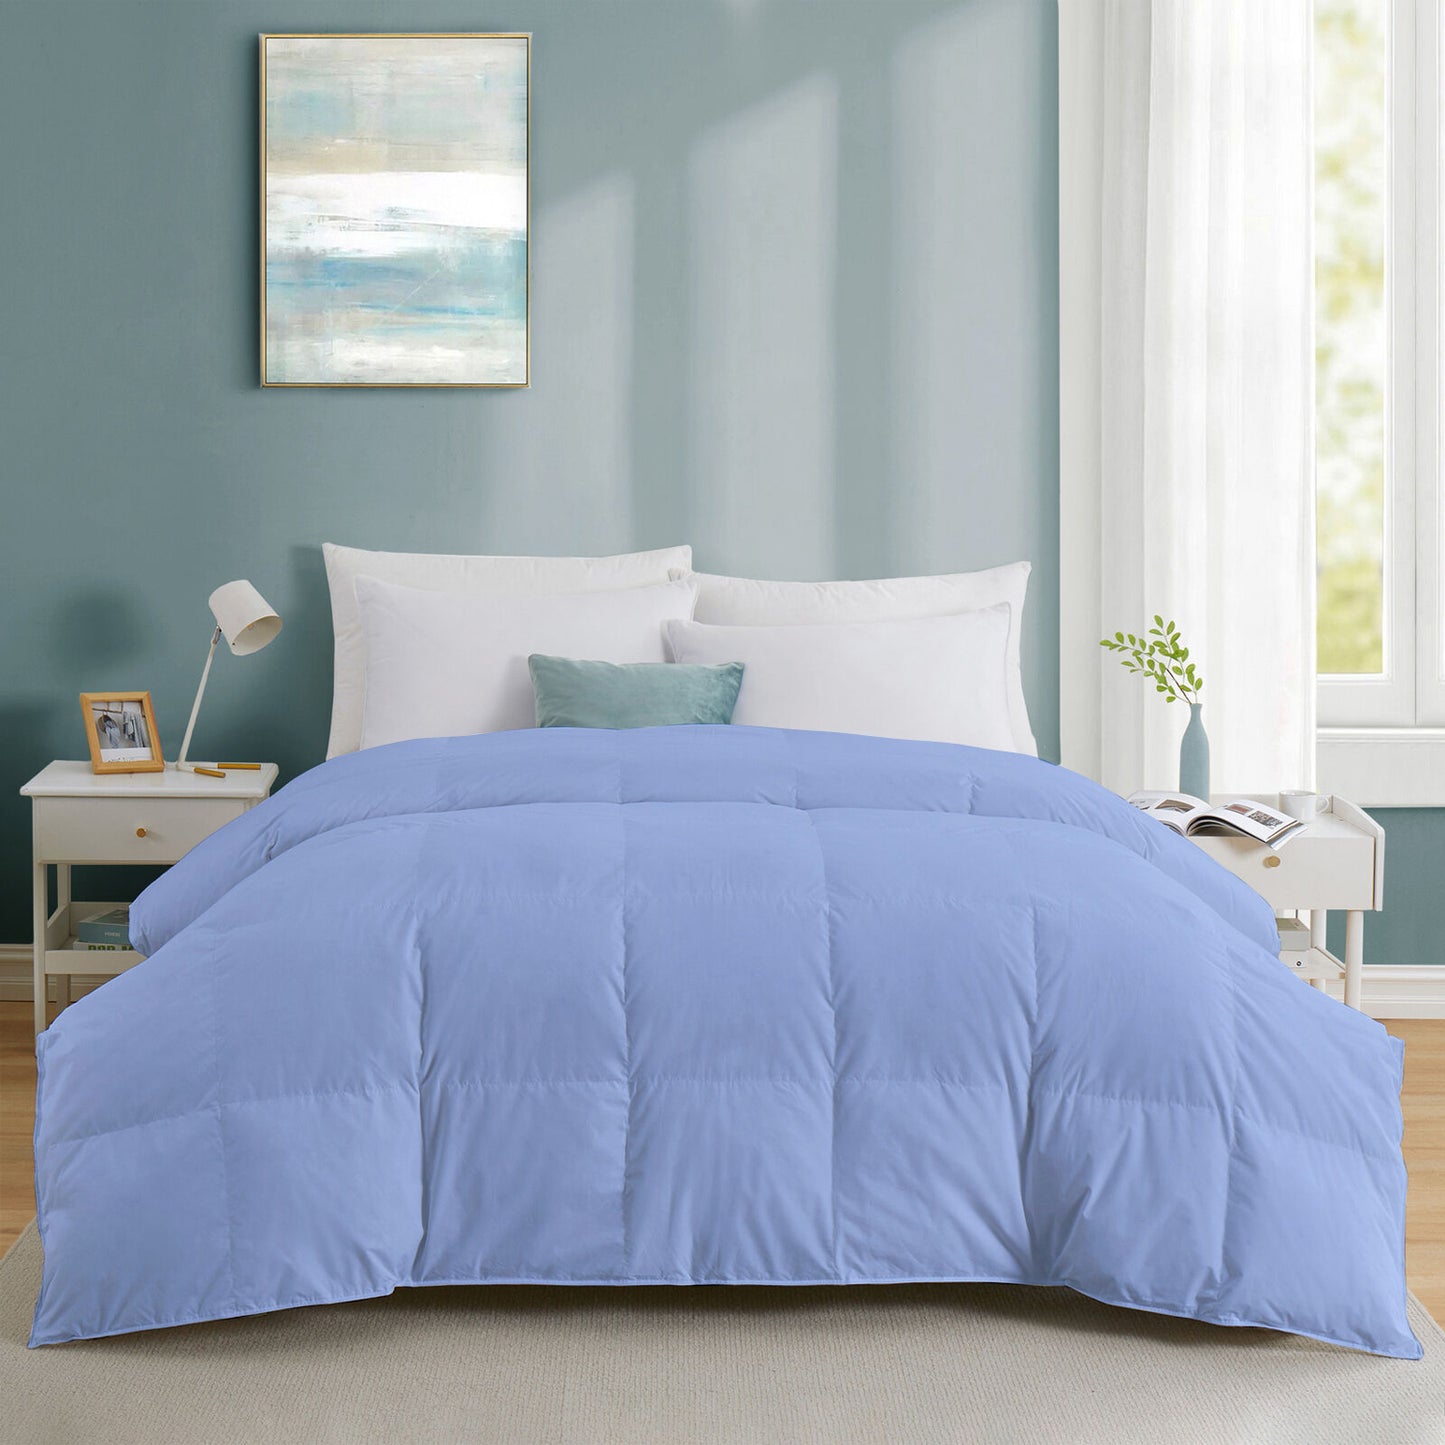 Razzai Down Alternative Soft Quilted 300 GSM All Weather Comforter|Teal | Microfibre, lightweight